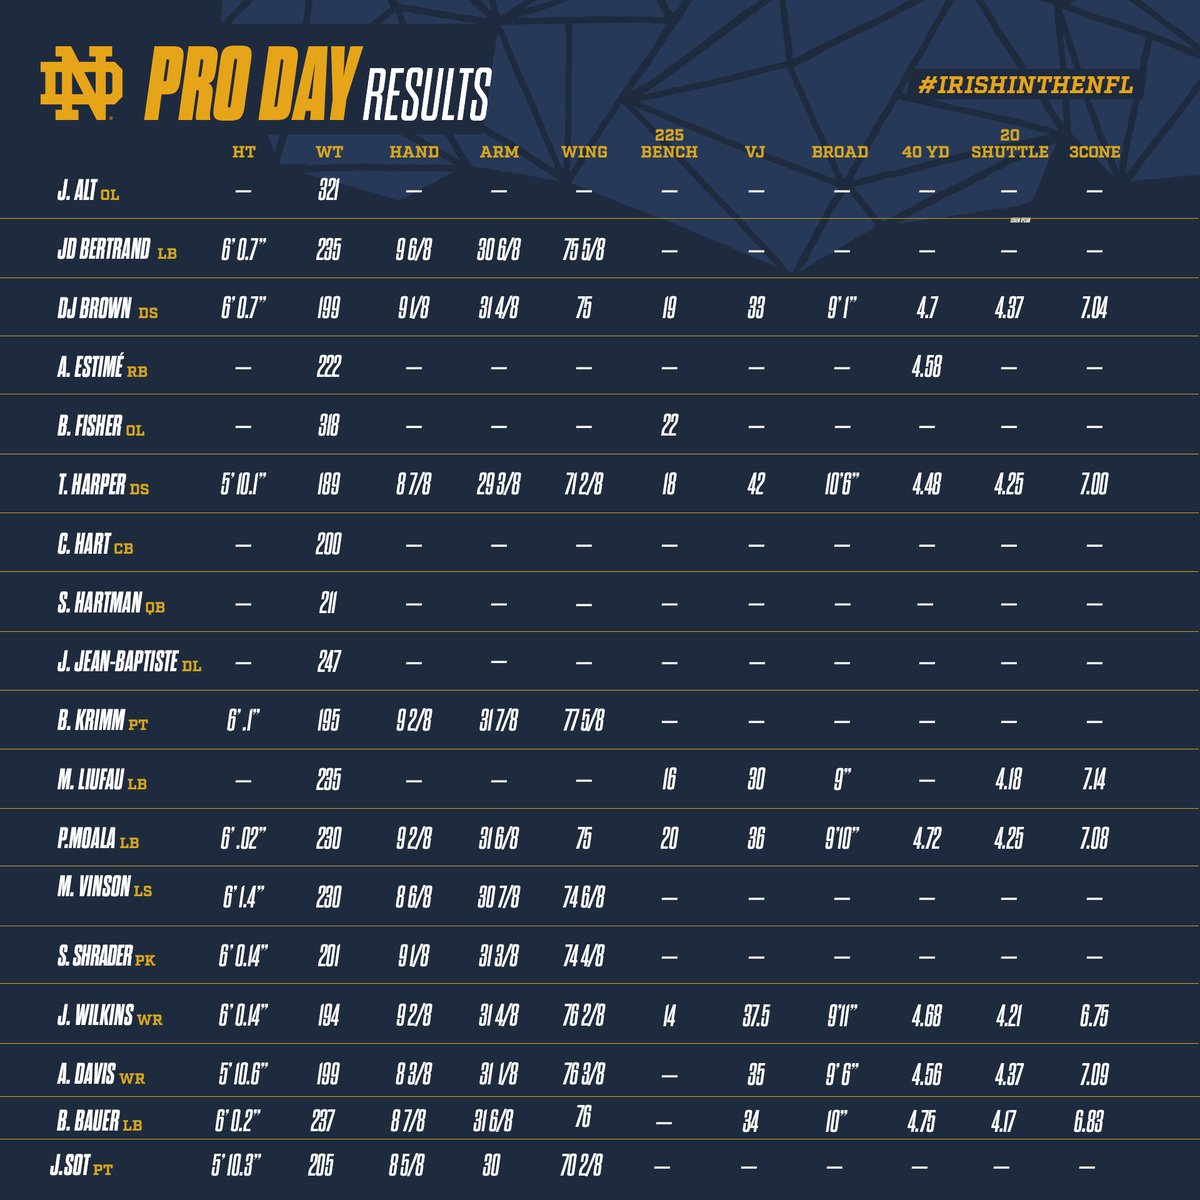 Here are the final measurements, times and results from today's @NDFootball Pro Day.